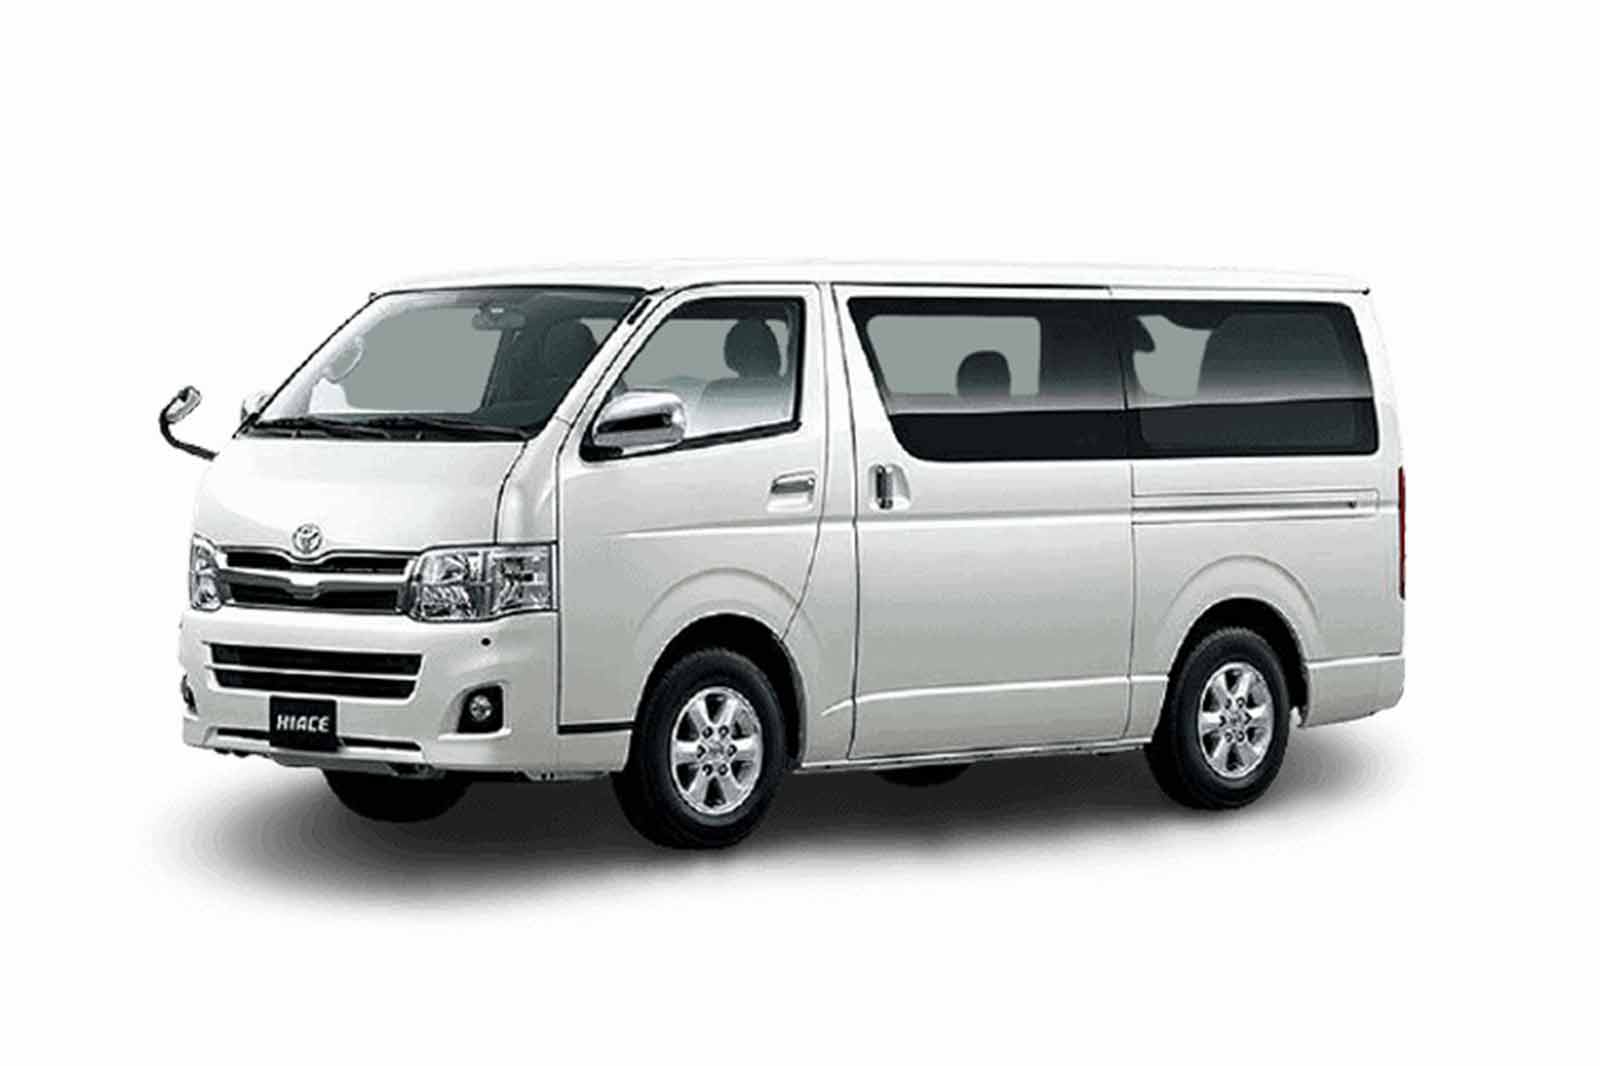 Toyota Hiace 14 Seater Hire with Driver in Dubai